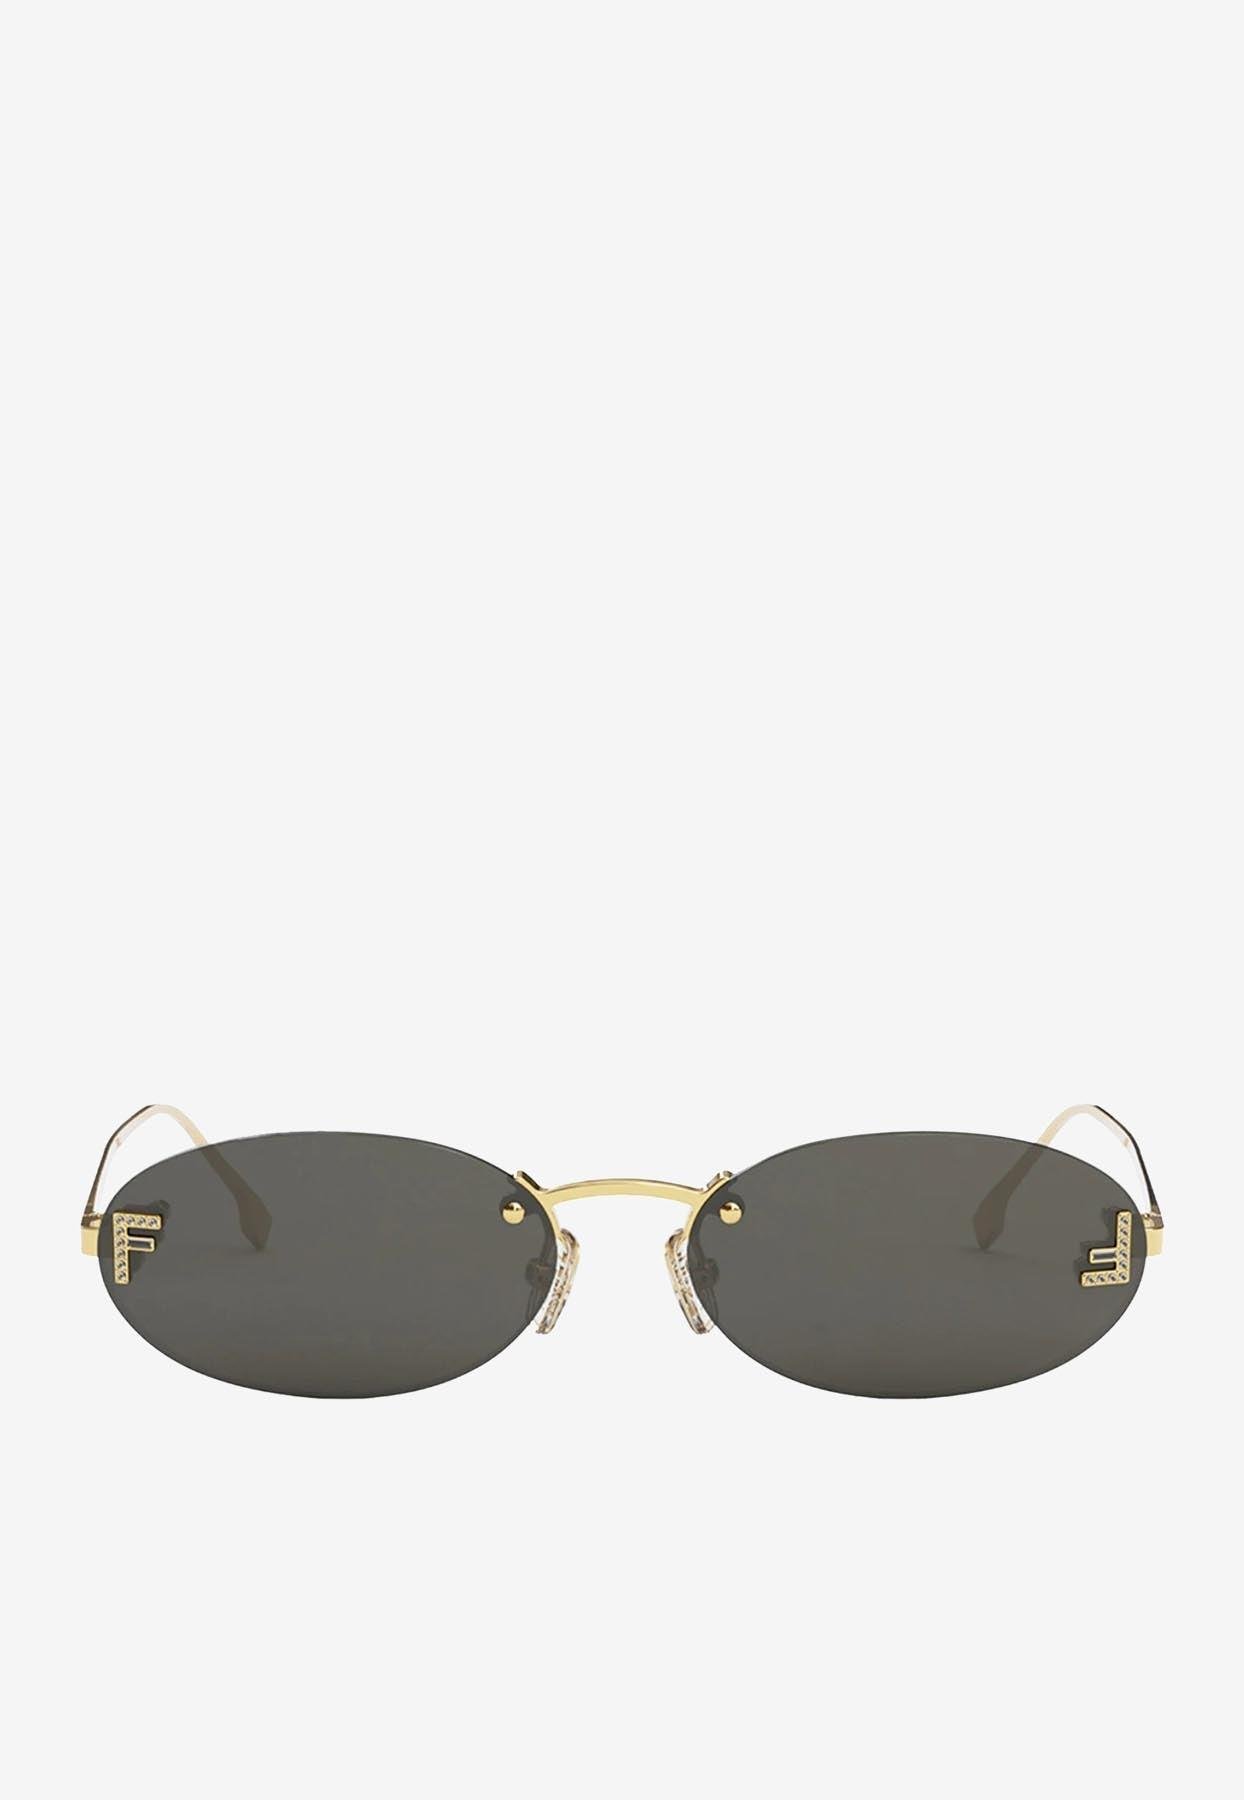 Fendi First Oval Sunglasses in Pink